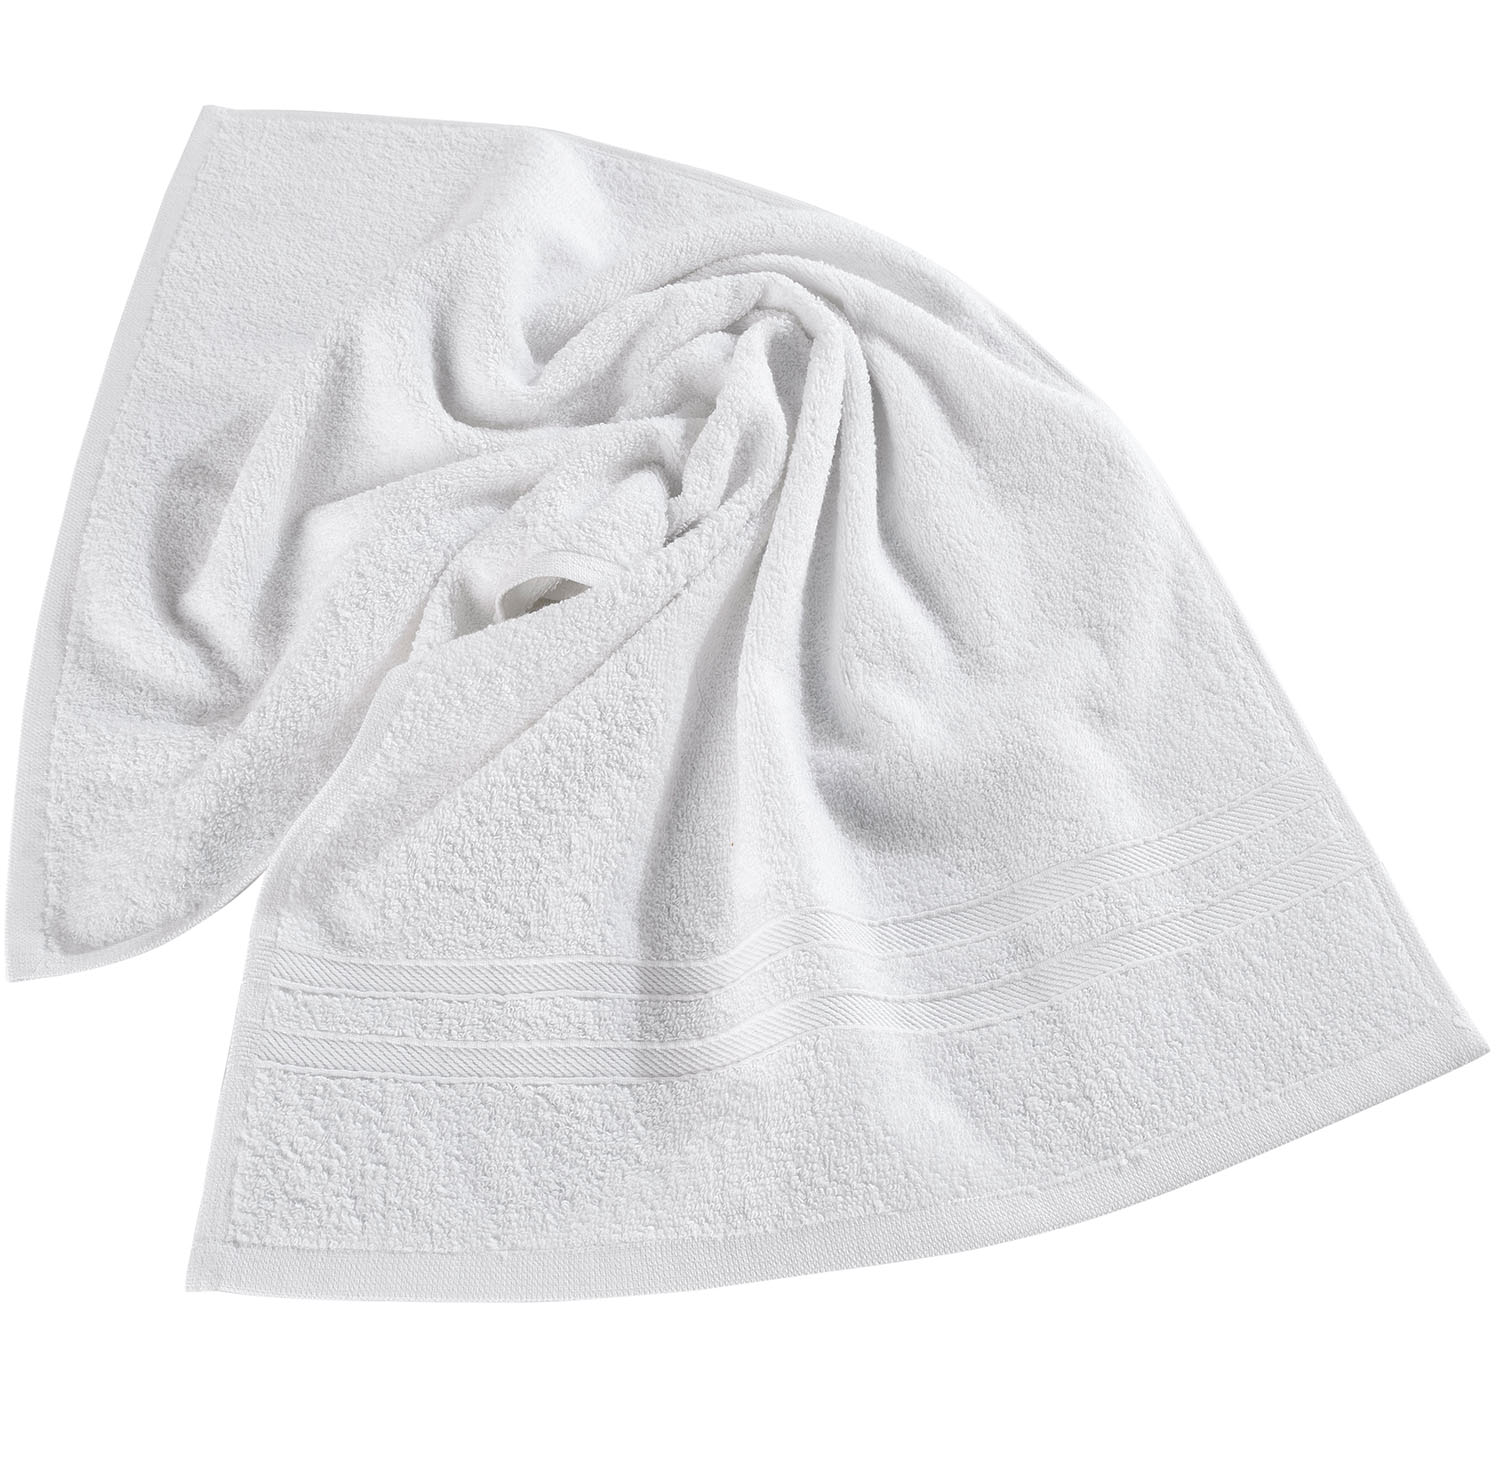 image 1 of Hammam Linen White Hand Towels Set of 4 – Luxury Cotton Hand Towels for Bathroom – Soft Quick Dry Towels